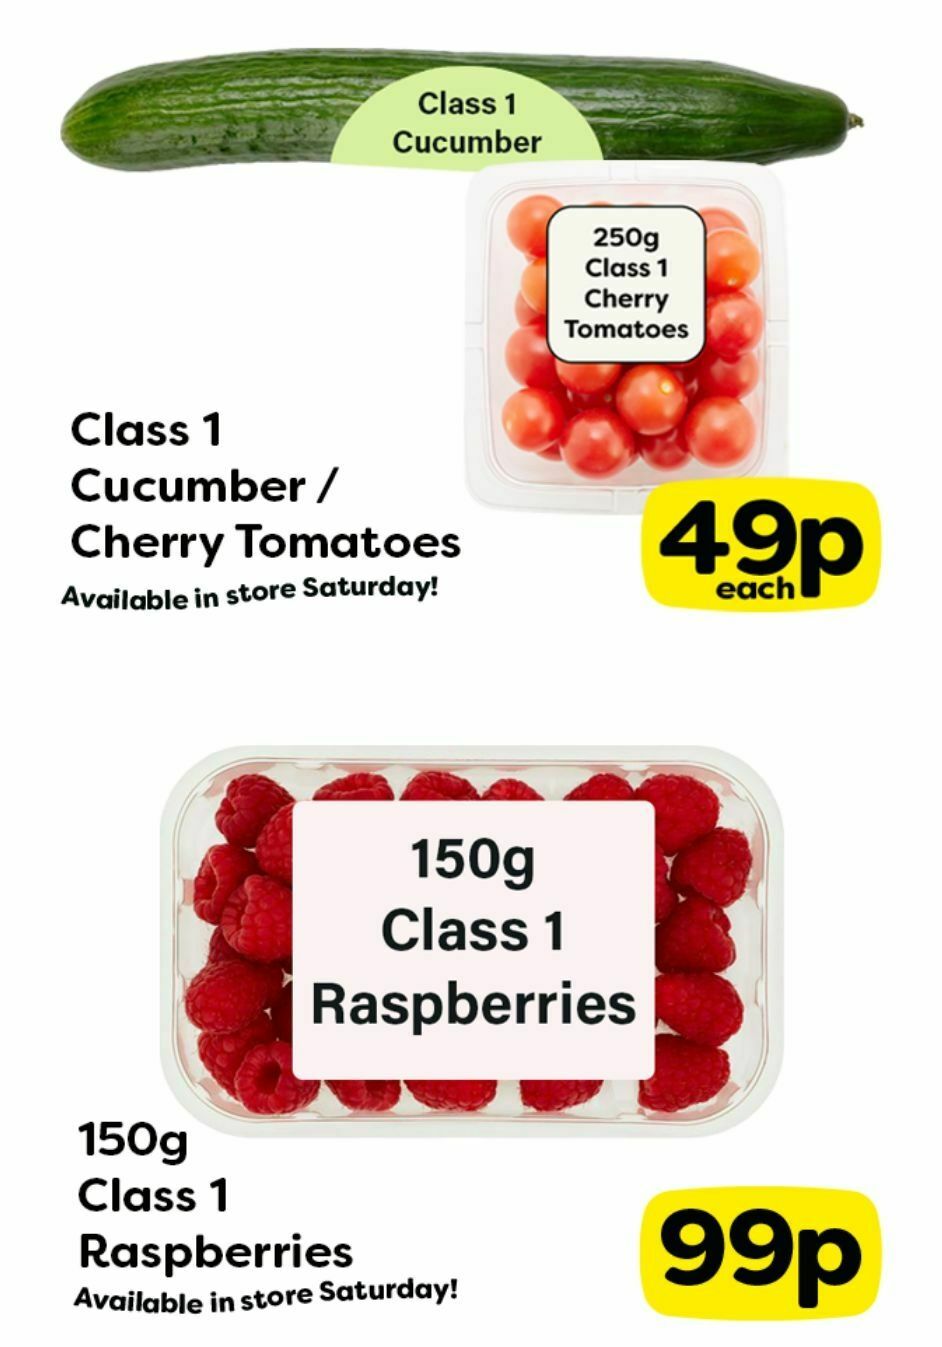 Farmfoods Offers from 19 February